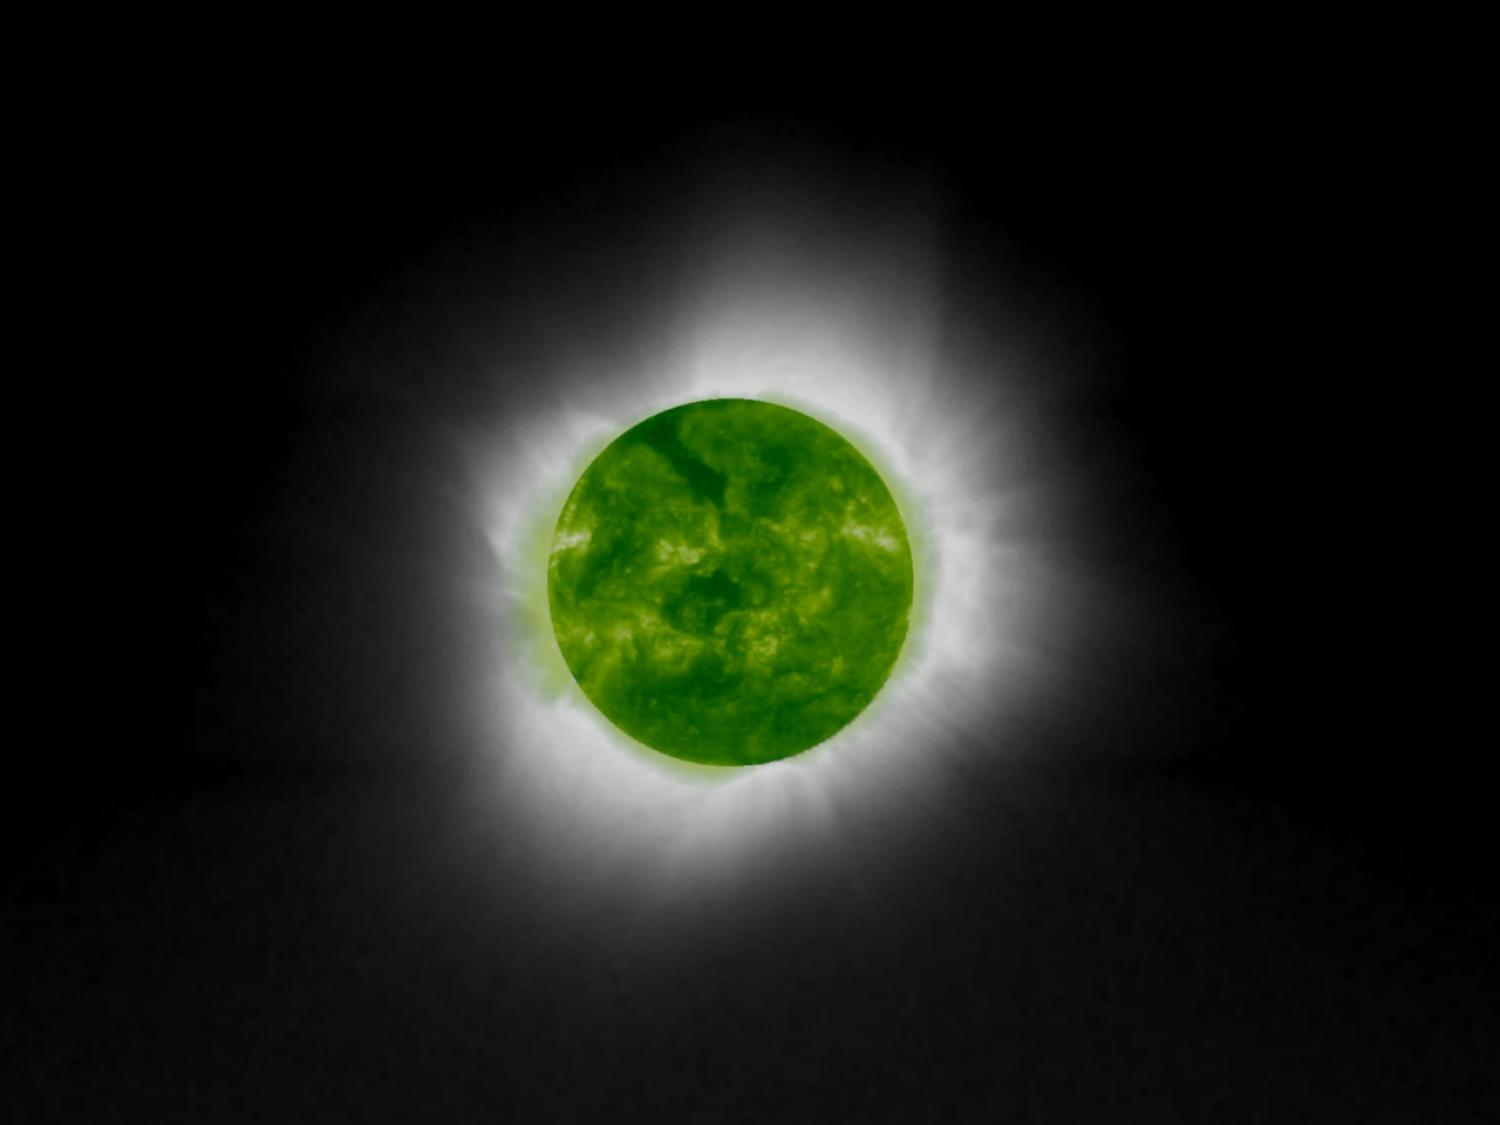 A photograph of a solar eclipse with data taken by the Extreme Ultraviolet Imaging Telescope instrument onboard the Solar and Heliospheric Observatory spacecraft (NASA Goddard Space Flight Centre/Flickr)